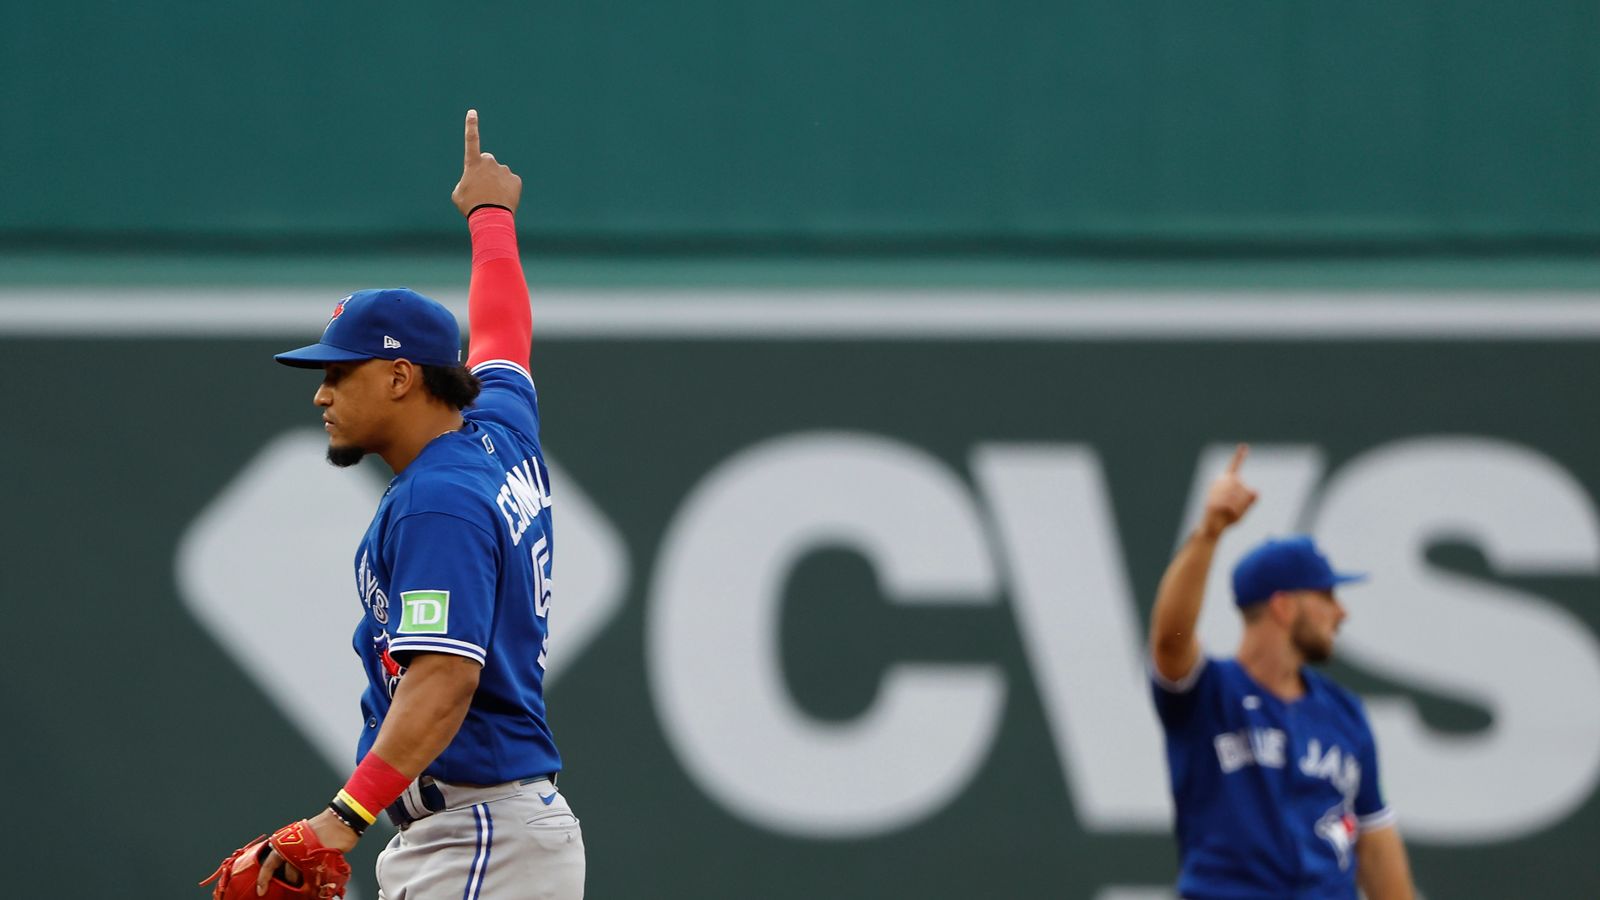 BSJ Game Report: Blue Jays 5, Red Sox 4 - Reese McGuire's baserunning  blunder ends Boston rally